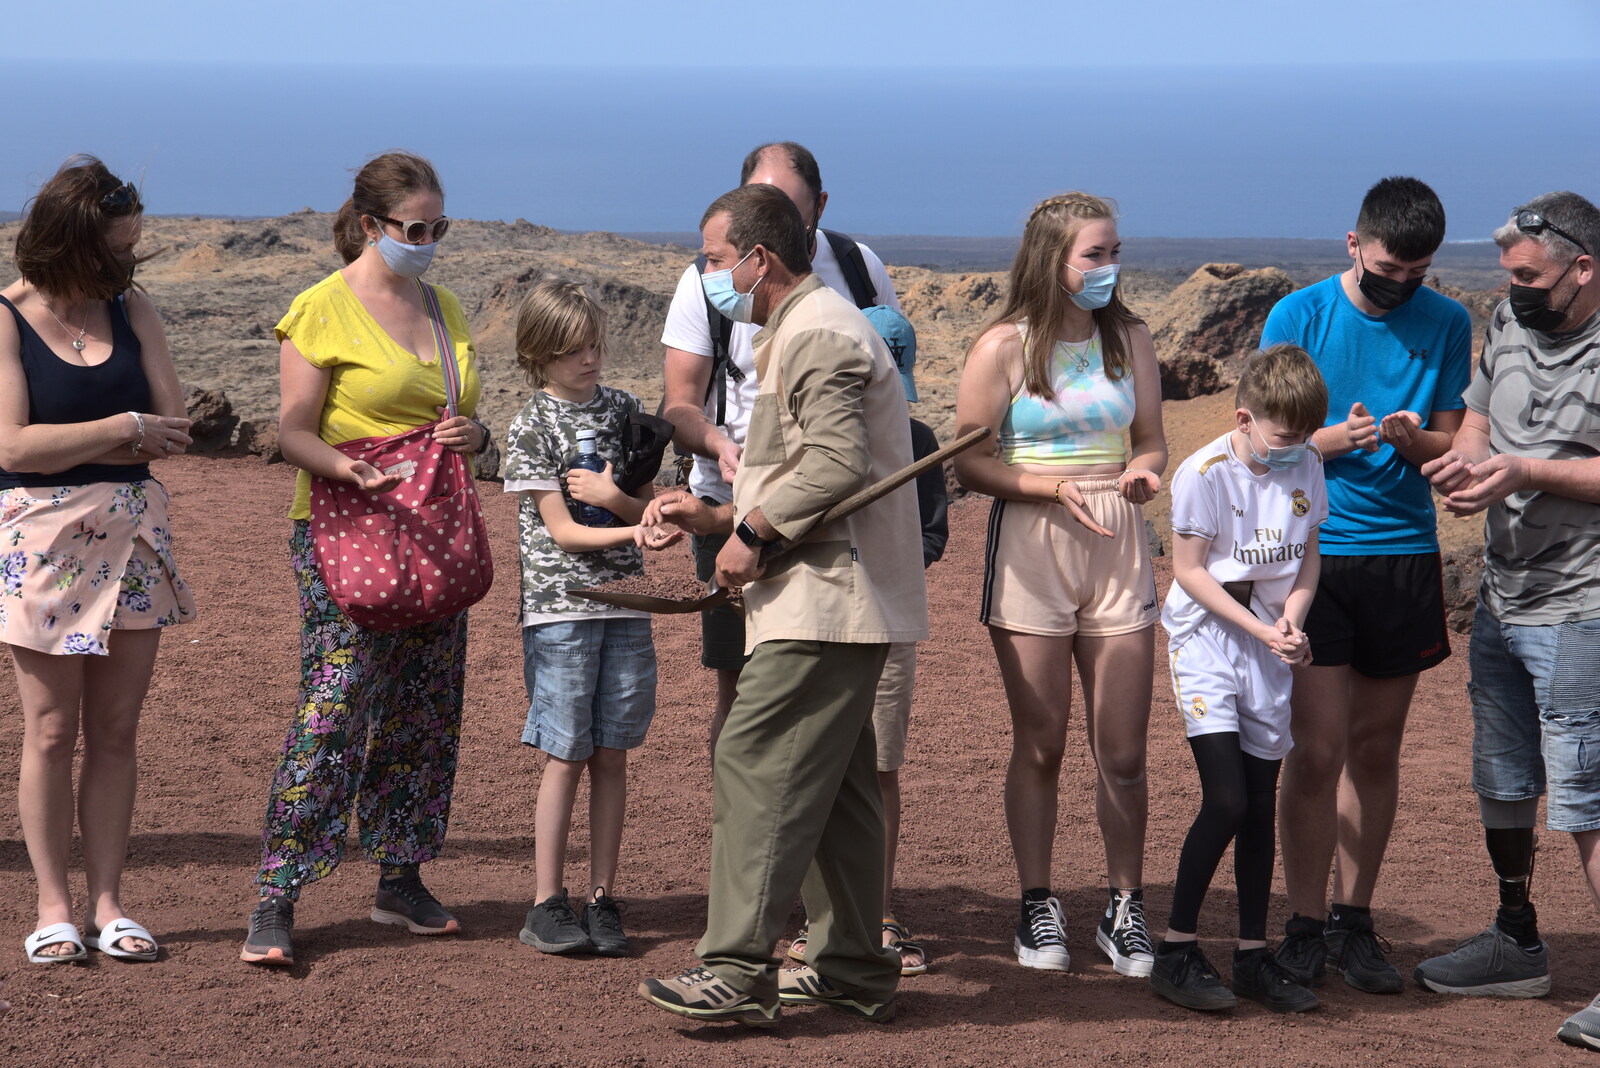 Harry gets handed some hot rocks from The Volcanoes of Lanzarote, Canary Islands, Spain - 27th October 2021